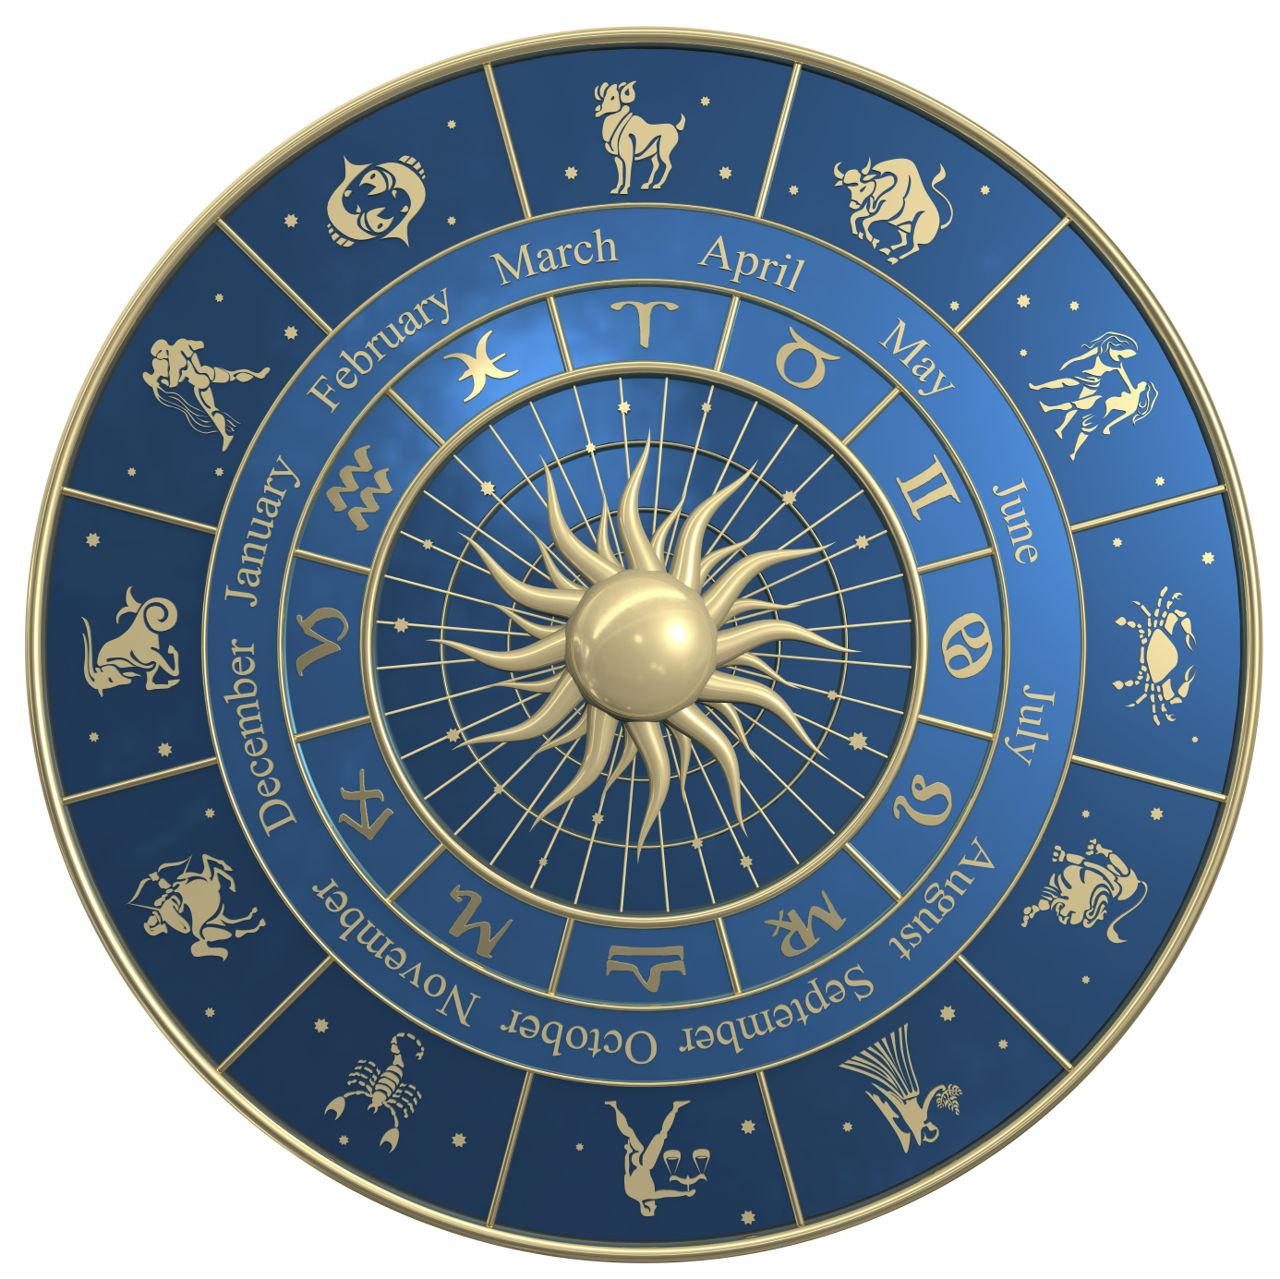 All horoscope signs and meanings